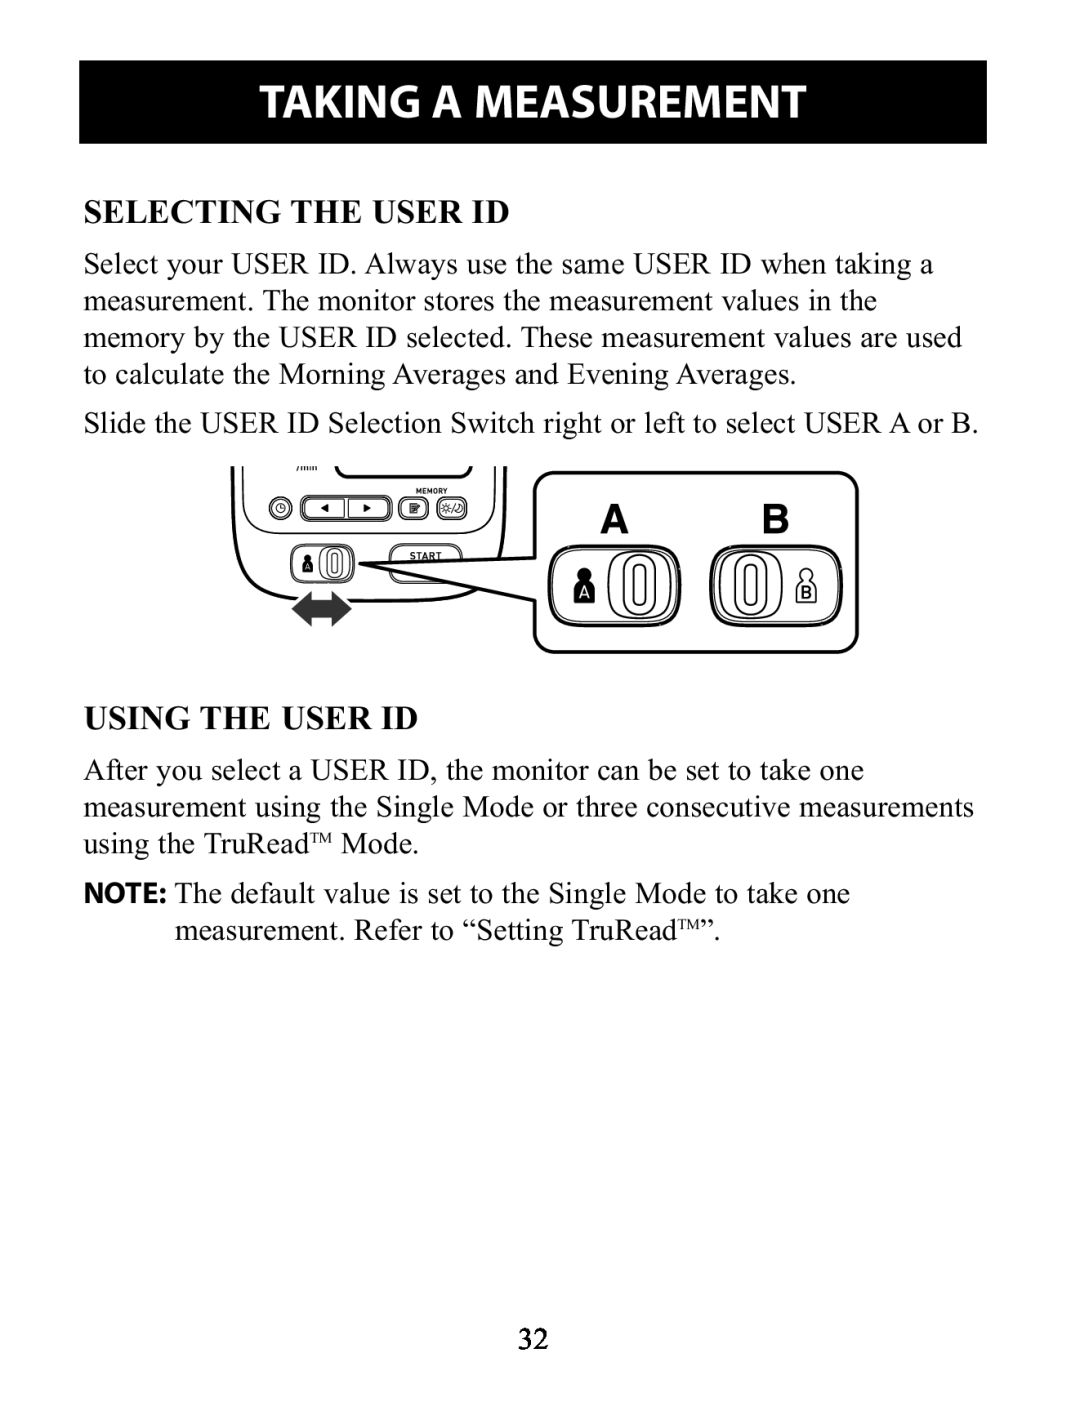 Omron Healthcare BP791IT instruction manual Selecting The User Id, Using The User Id, Taking A Measurement 